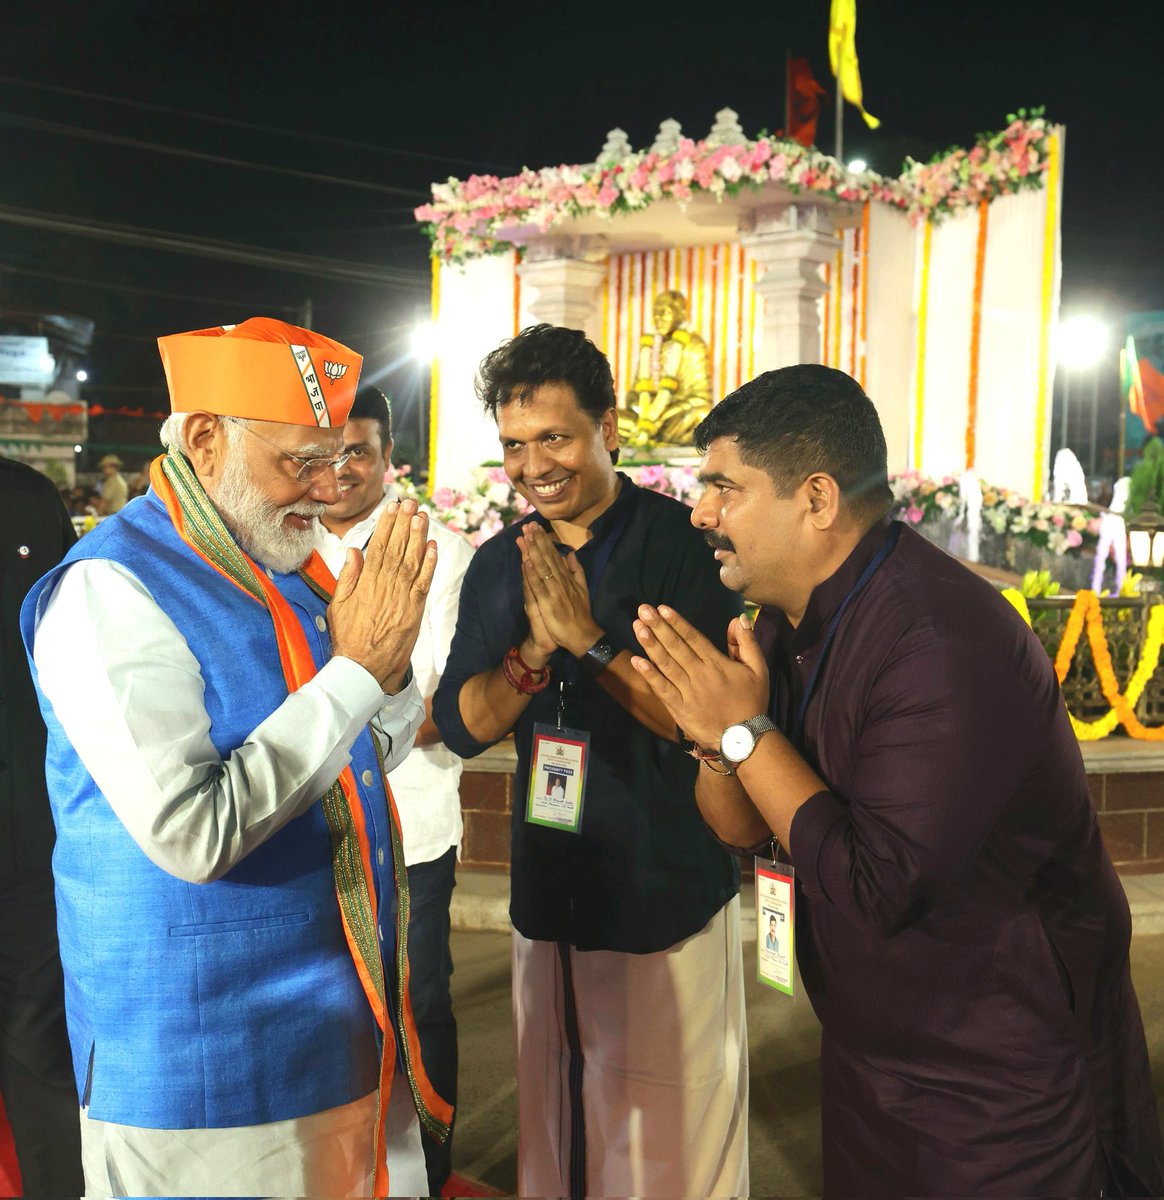 Glimpses of welcoming the country's proud Prime Minister Shri @narendramodi ji during his electriyfing road show in BJP's stronghold Mangalore 🙏🏻